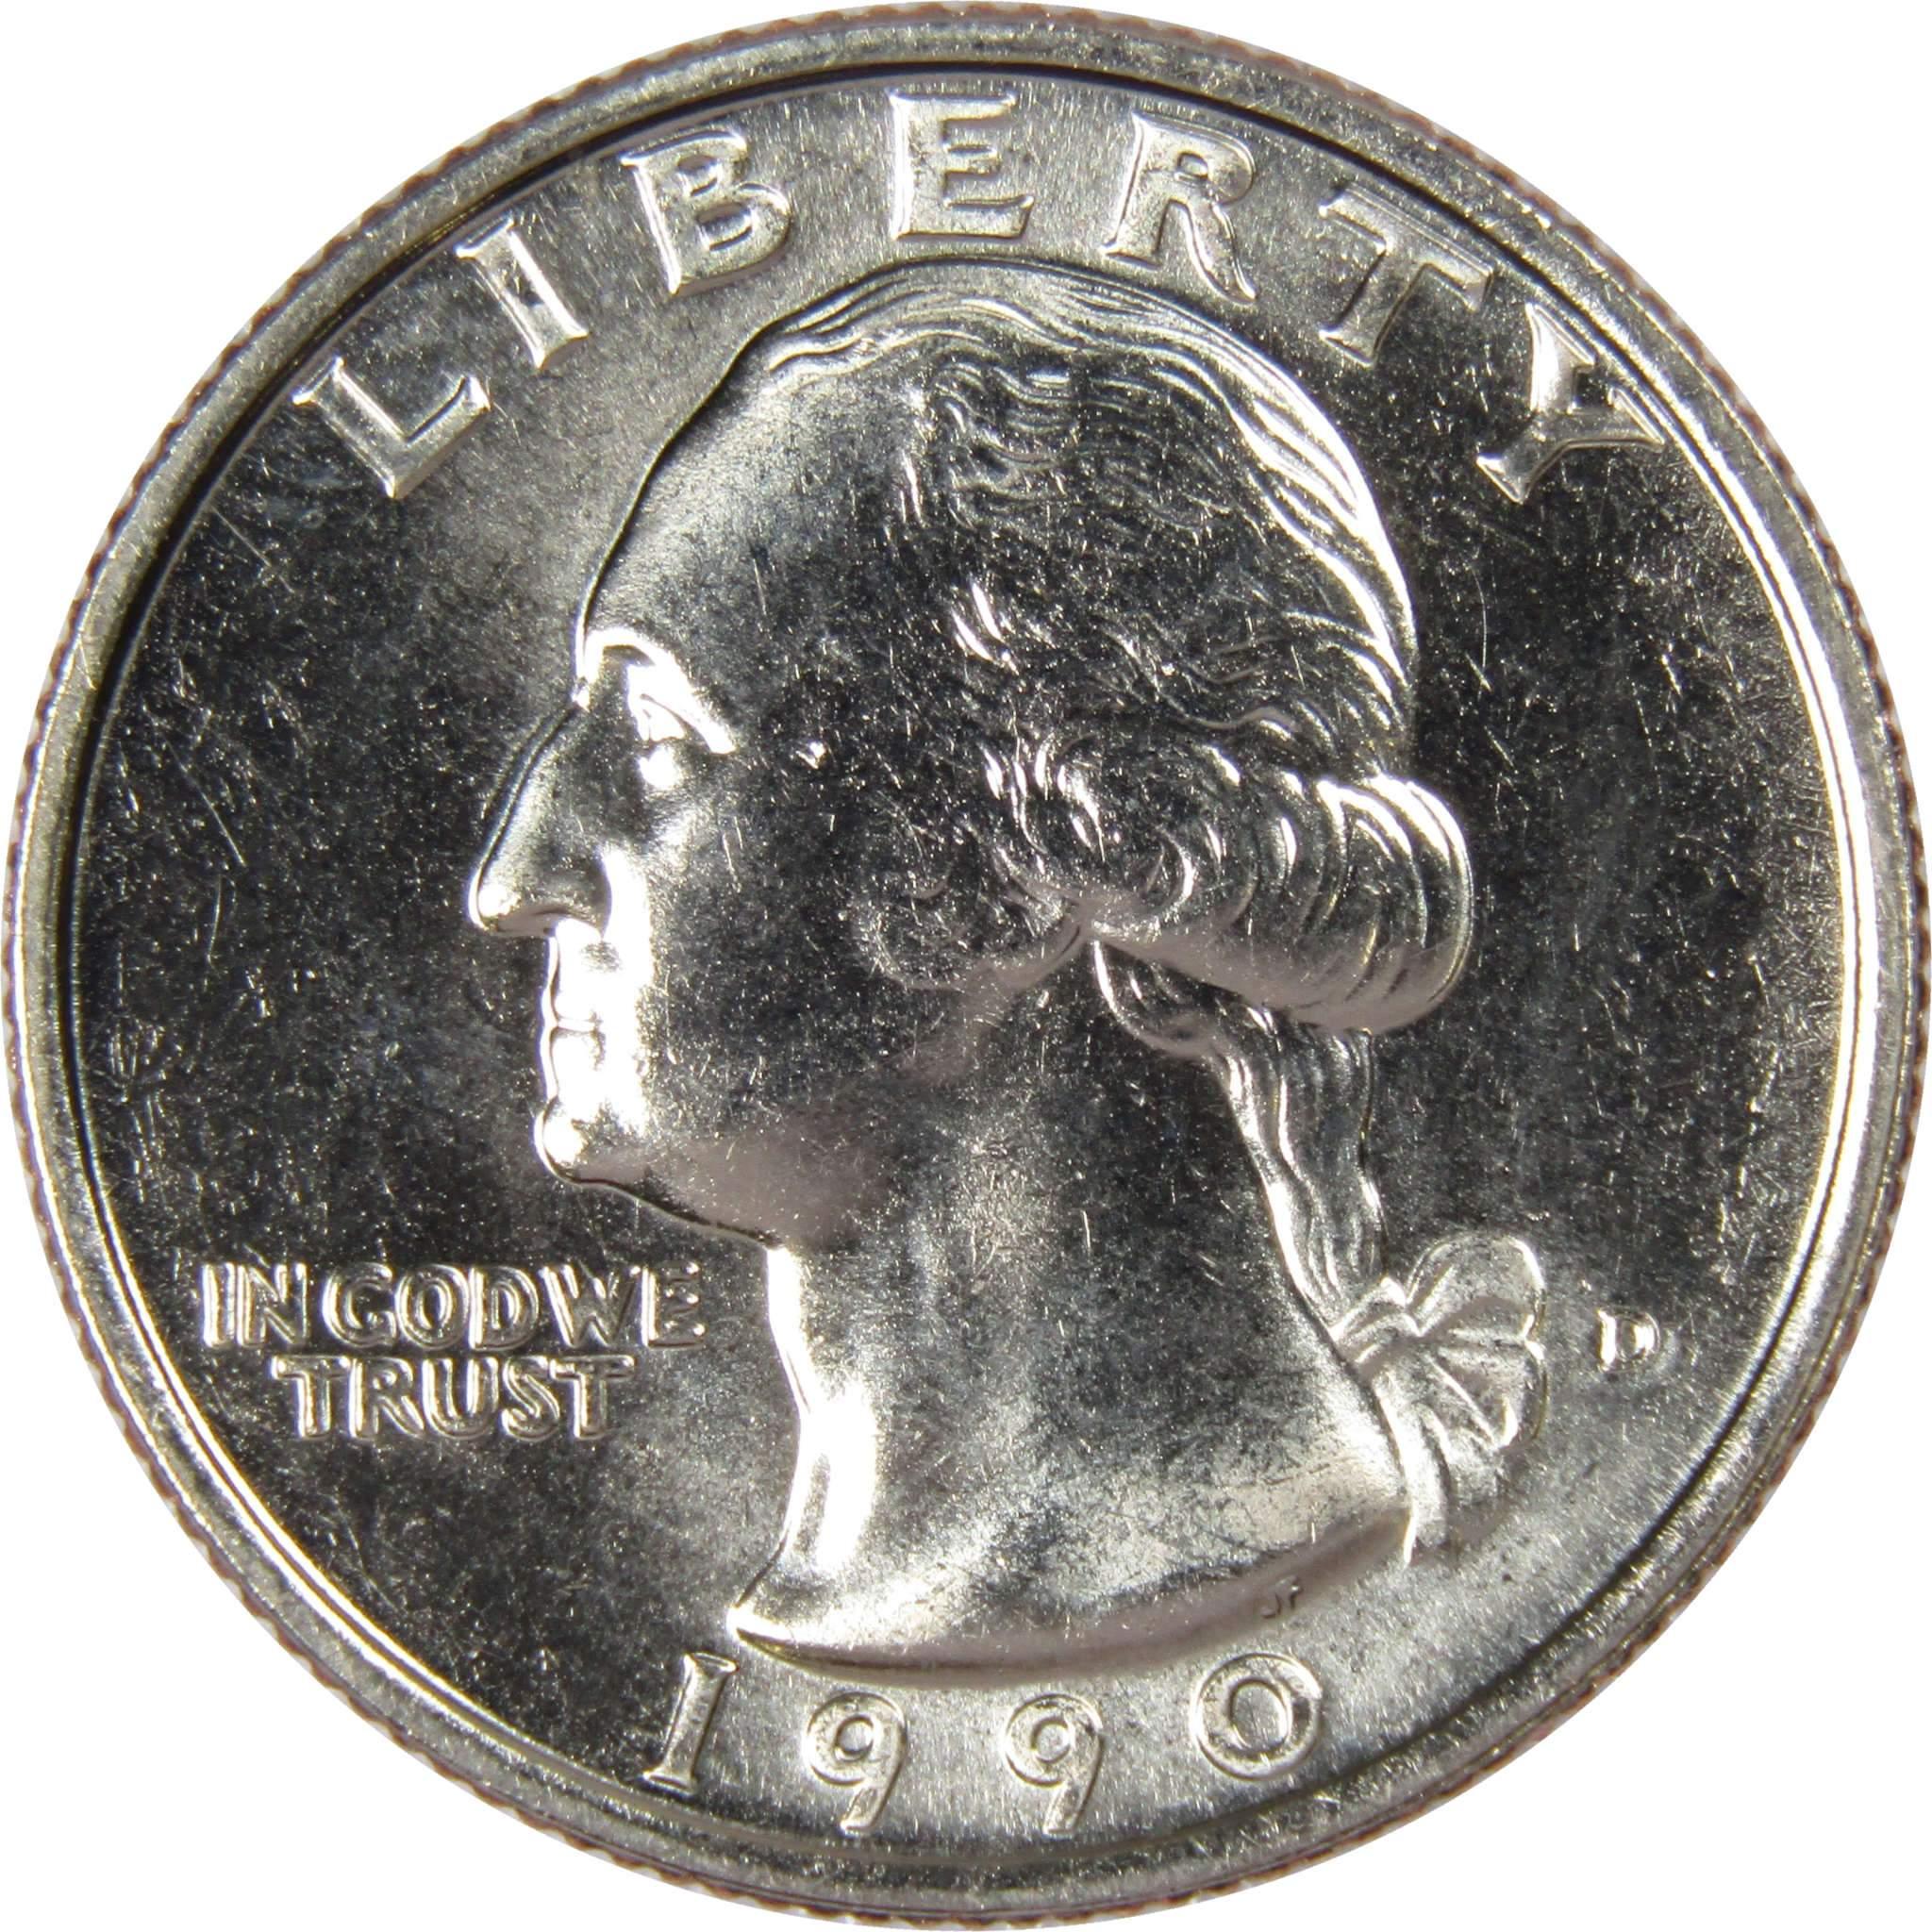 1990 D Washington Quarter BU Uncirculated Mint State 25c US Coin Collectible